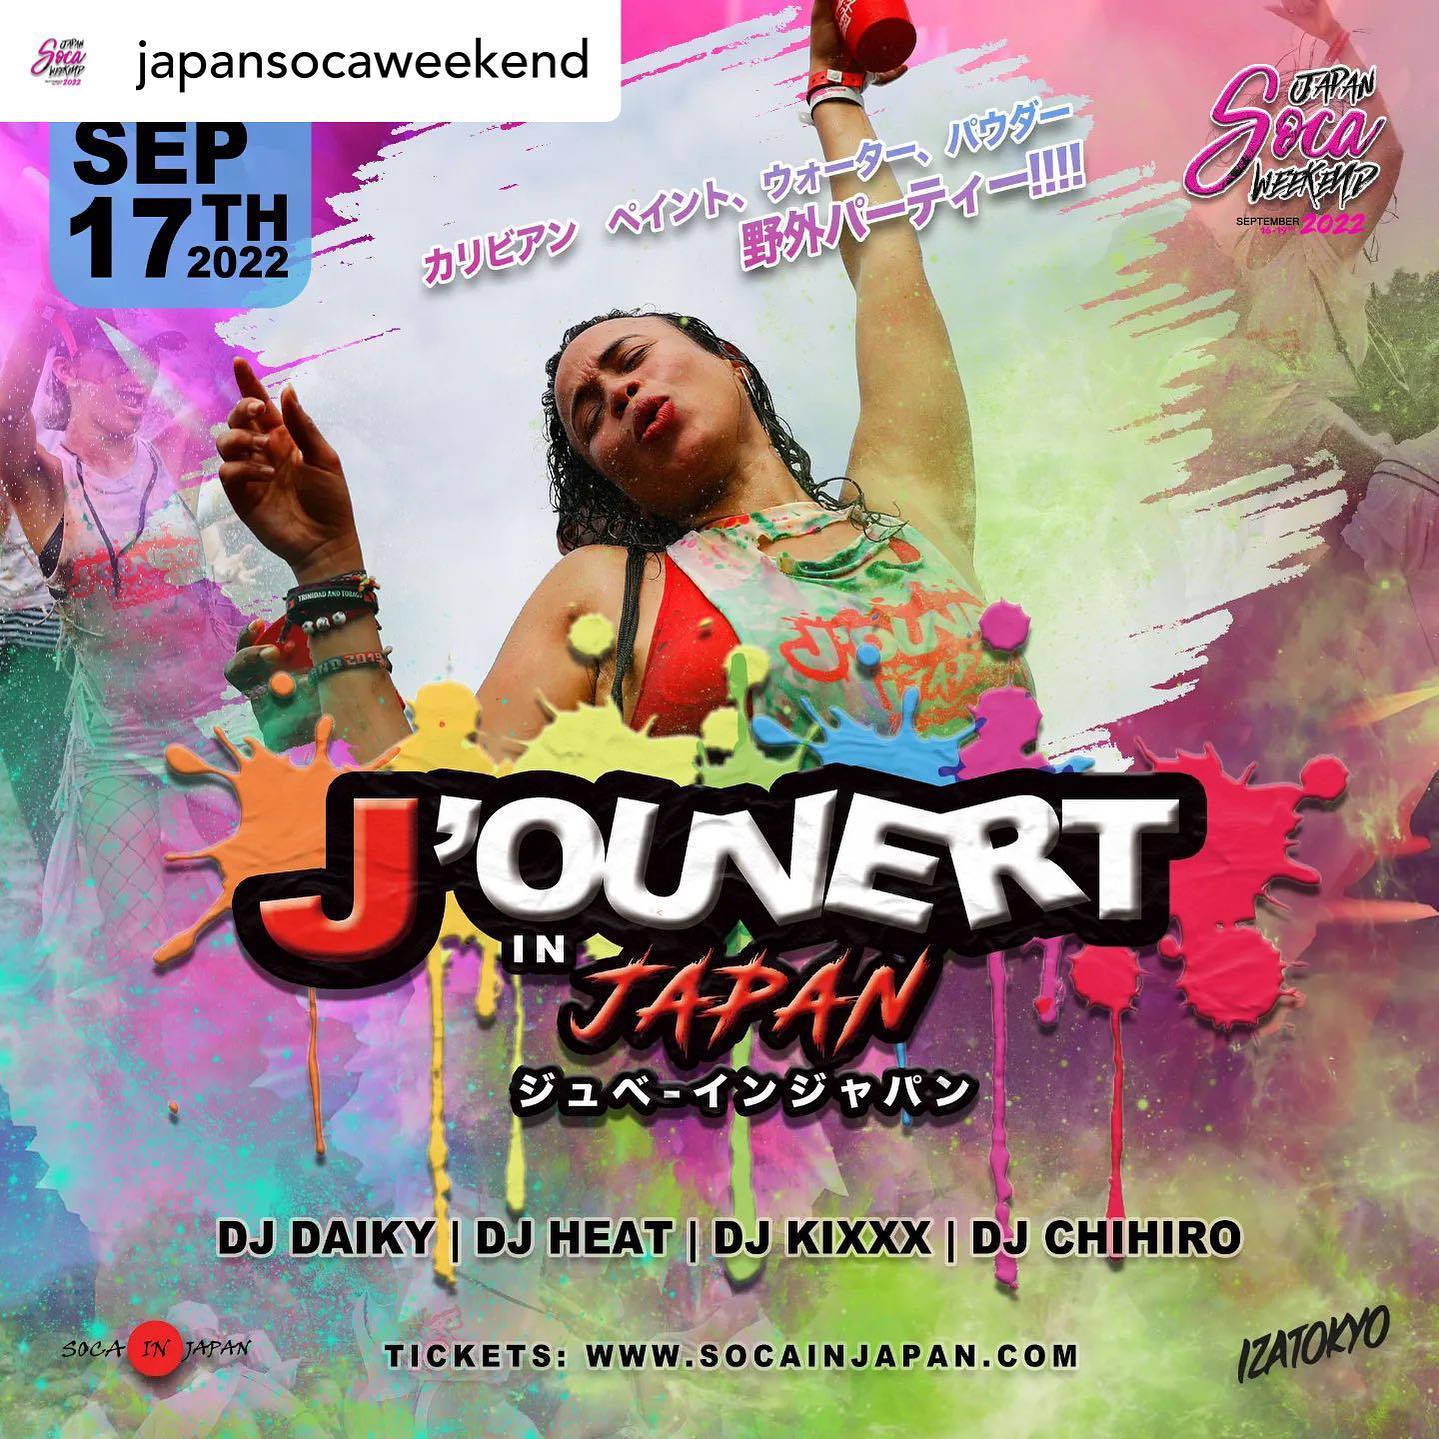 • @japansocaweekend Regular priced tickets now on sale! Get your tickets now before they're all sold out 

！！！【 J'OUVERT IN JAPAN 】！！！

ペイント、ウォーター、パウダー、ダンス、

カリビアン、カーニバルミュージック、フェス

この全てが楽しめる野外カラーパーティー【ジュベーインジャパン】

日付 : 2022年９月17日(土)
時間: 11:00 - 16:00
会場: War-Zone, 千葉

DJs 
@dj_kixxx
@djdaiky_jpn
@djheatjapan
@chihirochiba 

Presented by ⁣⁣
SOCA IN JAPAN @socainjapan ⁣⁣
IZATOKYO @izatokyo @iamizaiza 

チケット料金:⁣⁣ 
¥6500 早割 Sold Out
¥7500 前売 Sold Out
¥8500 レギュラー 
※5人もしくはそれ以上の団体様への割引有

※バスをご利用の際は追加オプションでバスチケットをお求めください
⁣⁣

チケットに含まれるもの: ⁣⁣
 ランチボックス(お弁当)
 JIJオリジナルドリンクカップ
 JIJオリジナル Tシャツ

Japan Soca Weekend 2022 (JSW2022)

Event J'ouvert in Japan

Location: War-Zone, Chiba
Date: 17 Sep 2022
Time: 1100 – 1600

We're finally back after 3 years!!! If you think 2019 was vibes, get ready for 2022!!

Package Price :⁣⁣
¥6500 Early bird Sold out
¥7500 Advance Sold out
¥8500 Regular selling fast!

No tickets at the door!

Discounts for groups 5 or more available!
⁣⁣
Package includes: ⁣⁣
 One lunch box
 Drink cup
 Jouvert t-shirt⁣ ⁣

More details on website
..................⁣⁣

Tickets: www.socainjapan.com⁣⁣
......................⁣⁣
#jouvert 

#ソカ 